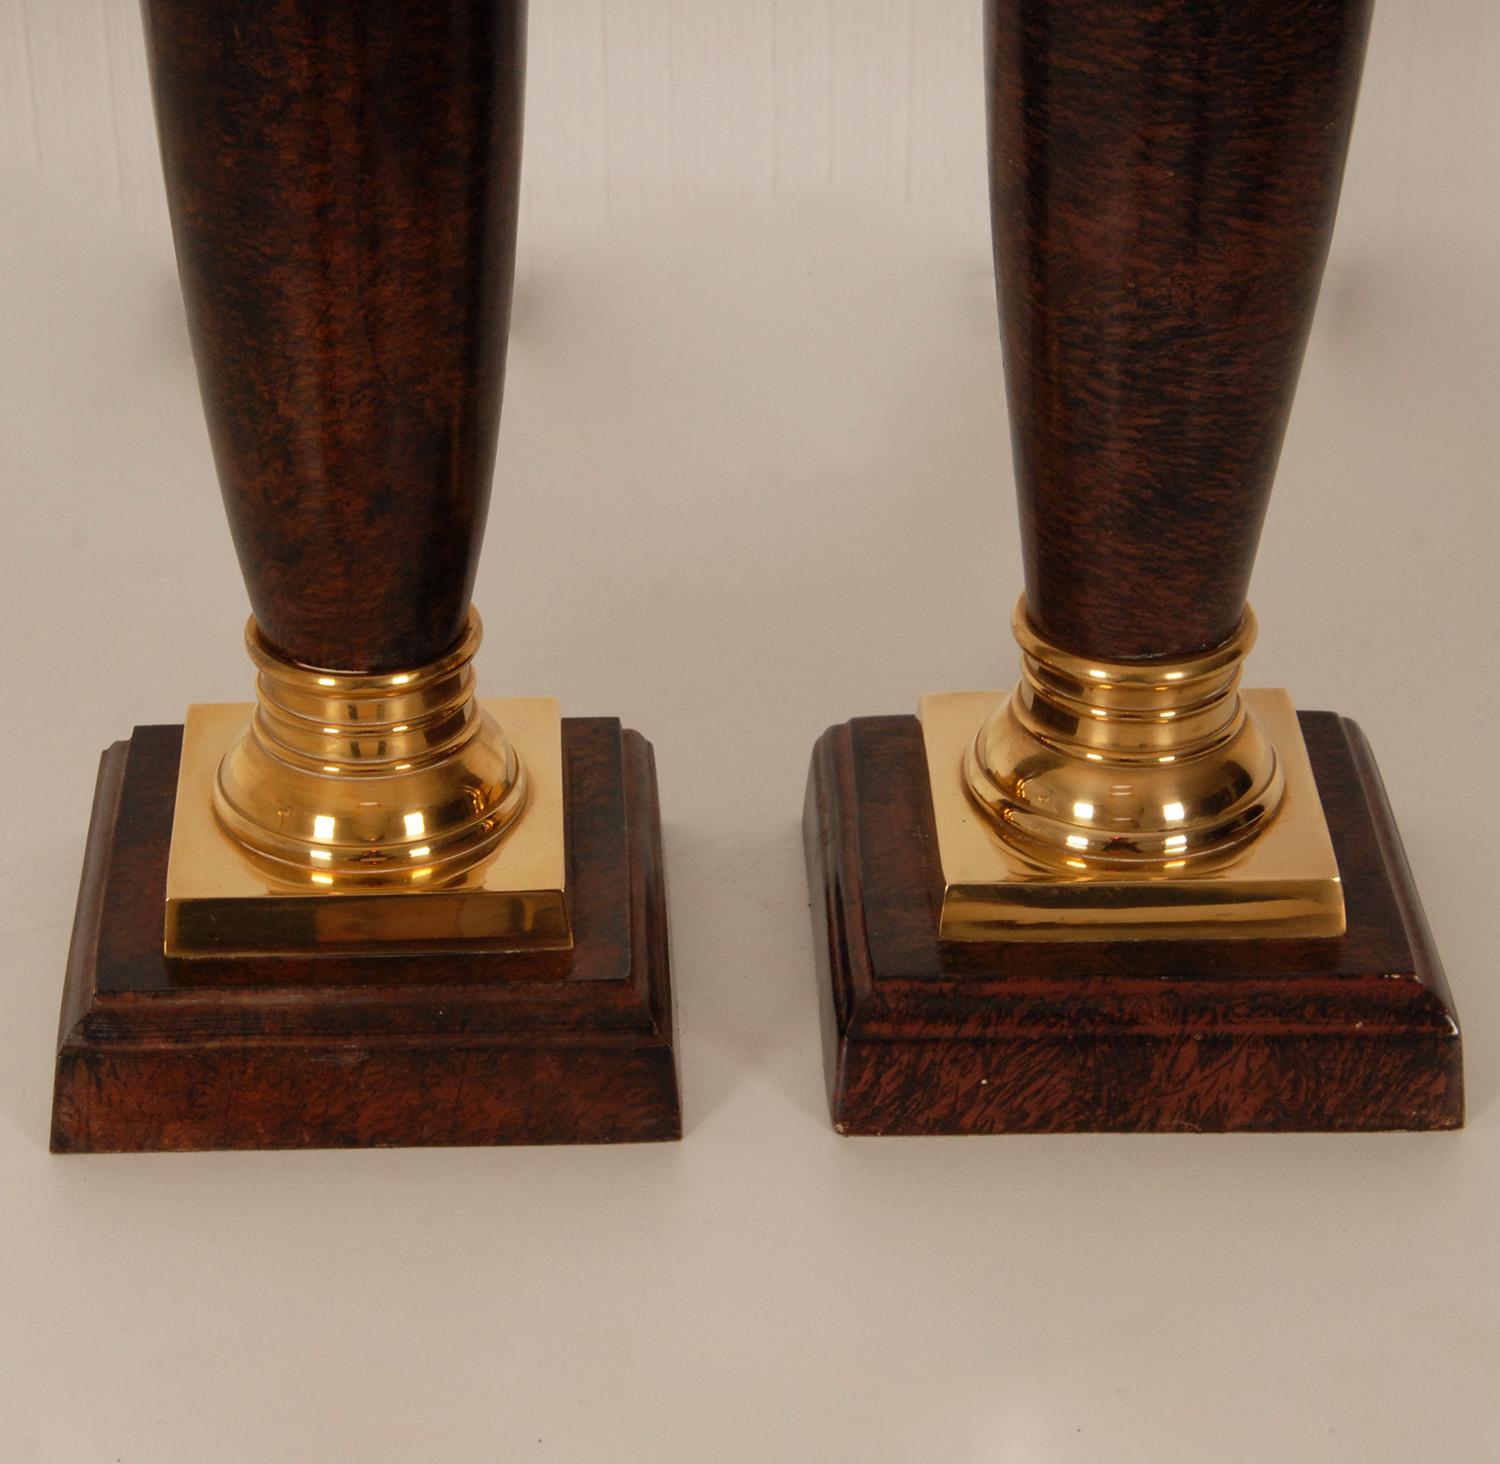 Vintage Napoleonic Column Table Lamps French Rosewood Gold Gilded Bronze, a Pair For Sale 2